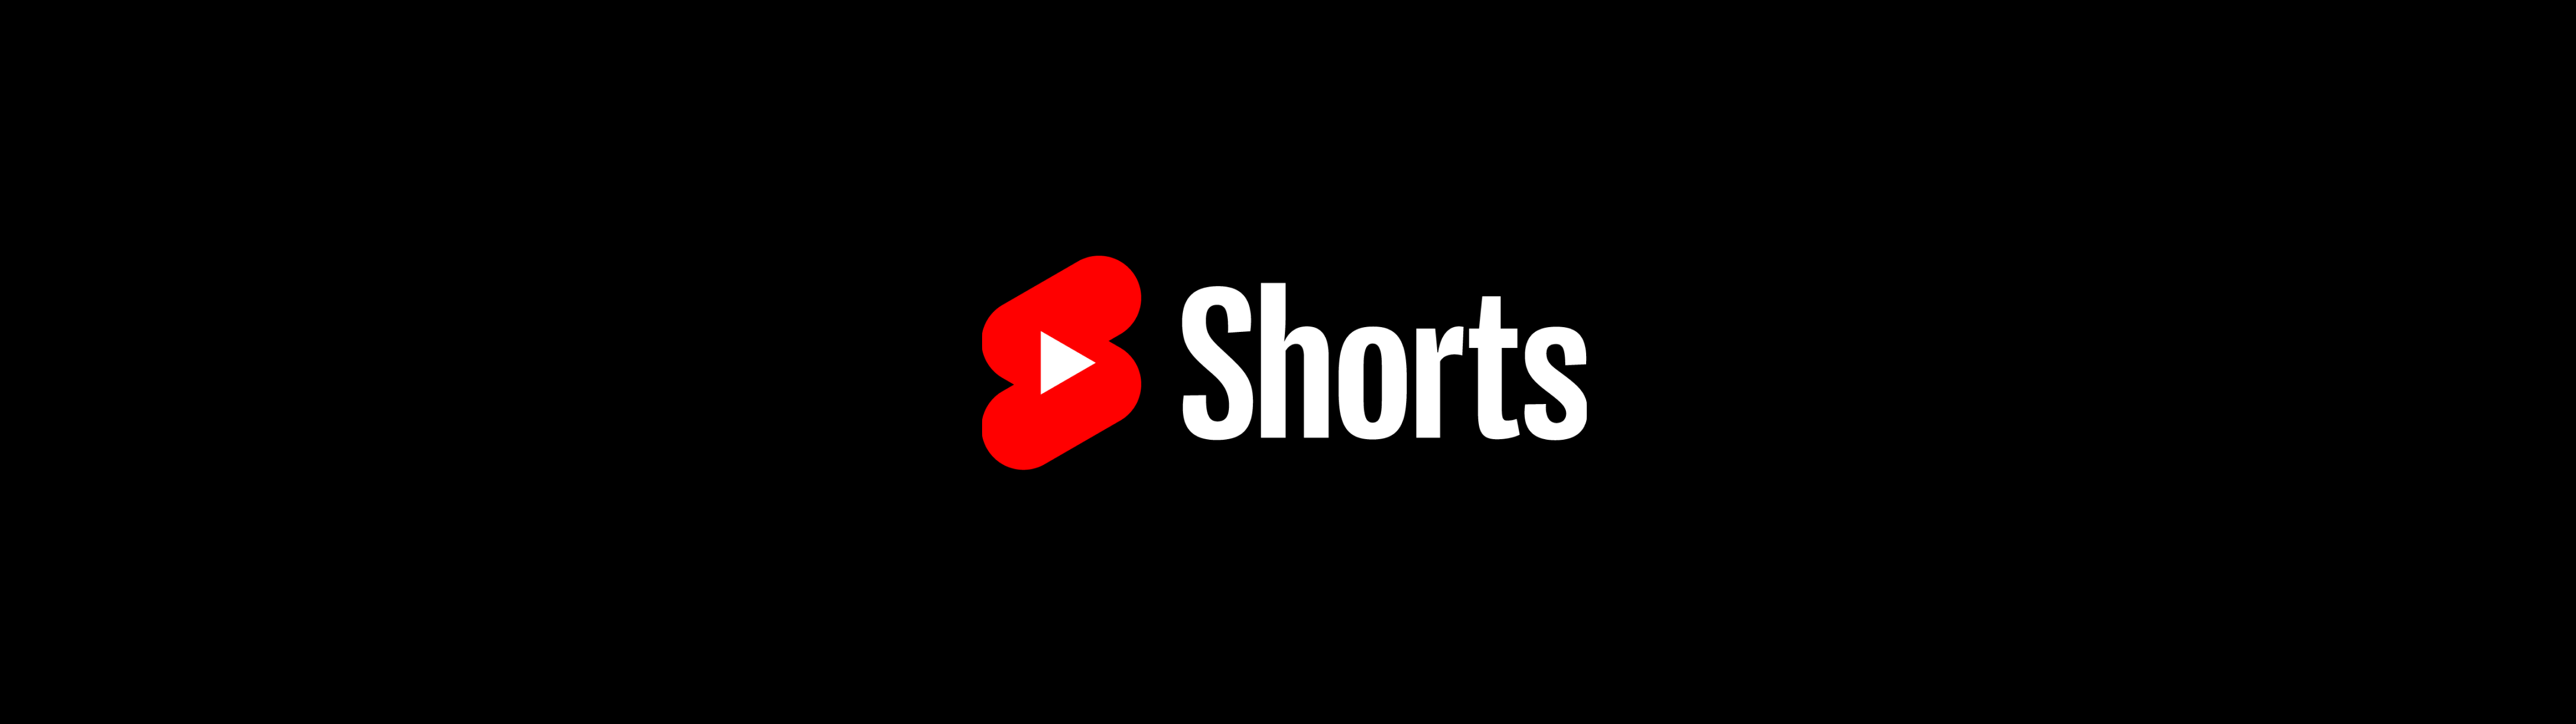 ‘YouTube Shorts’ Launches Beta Phase in the U.S.